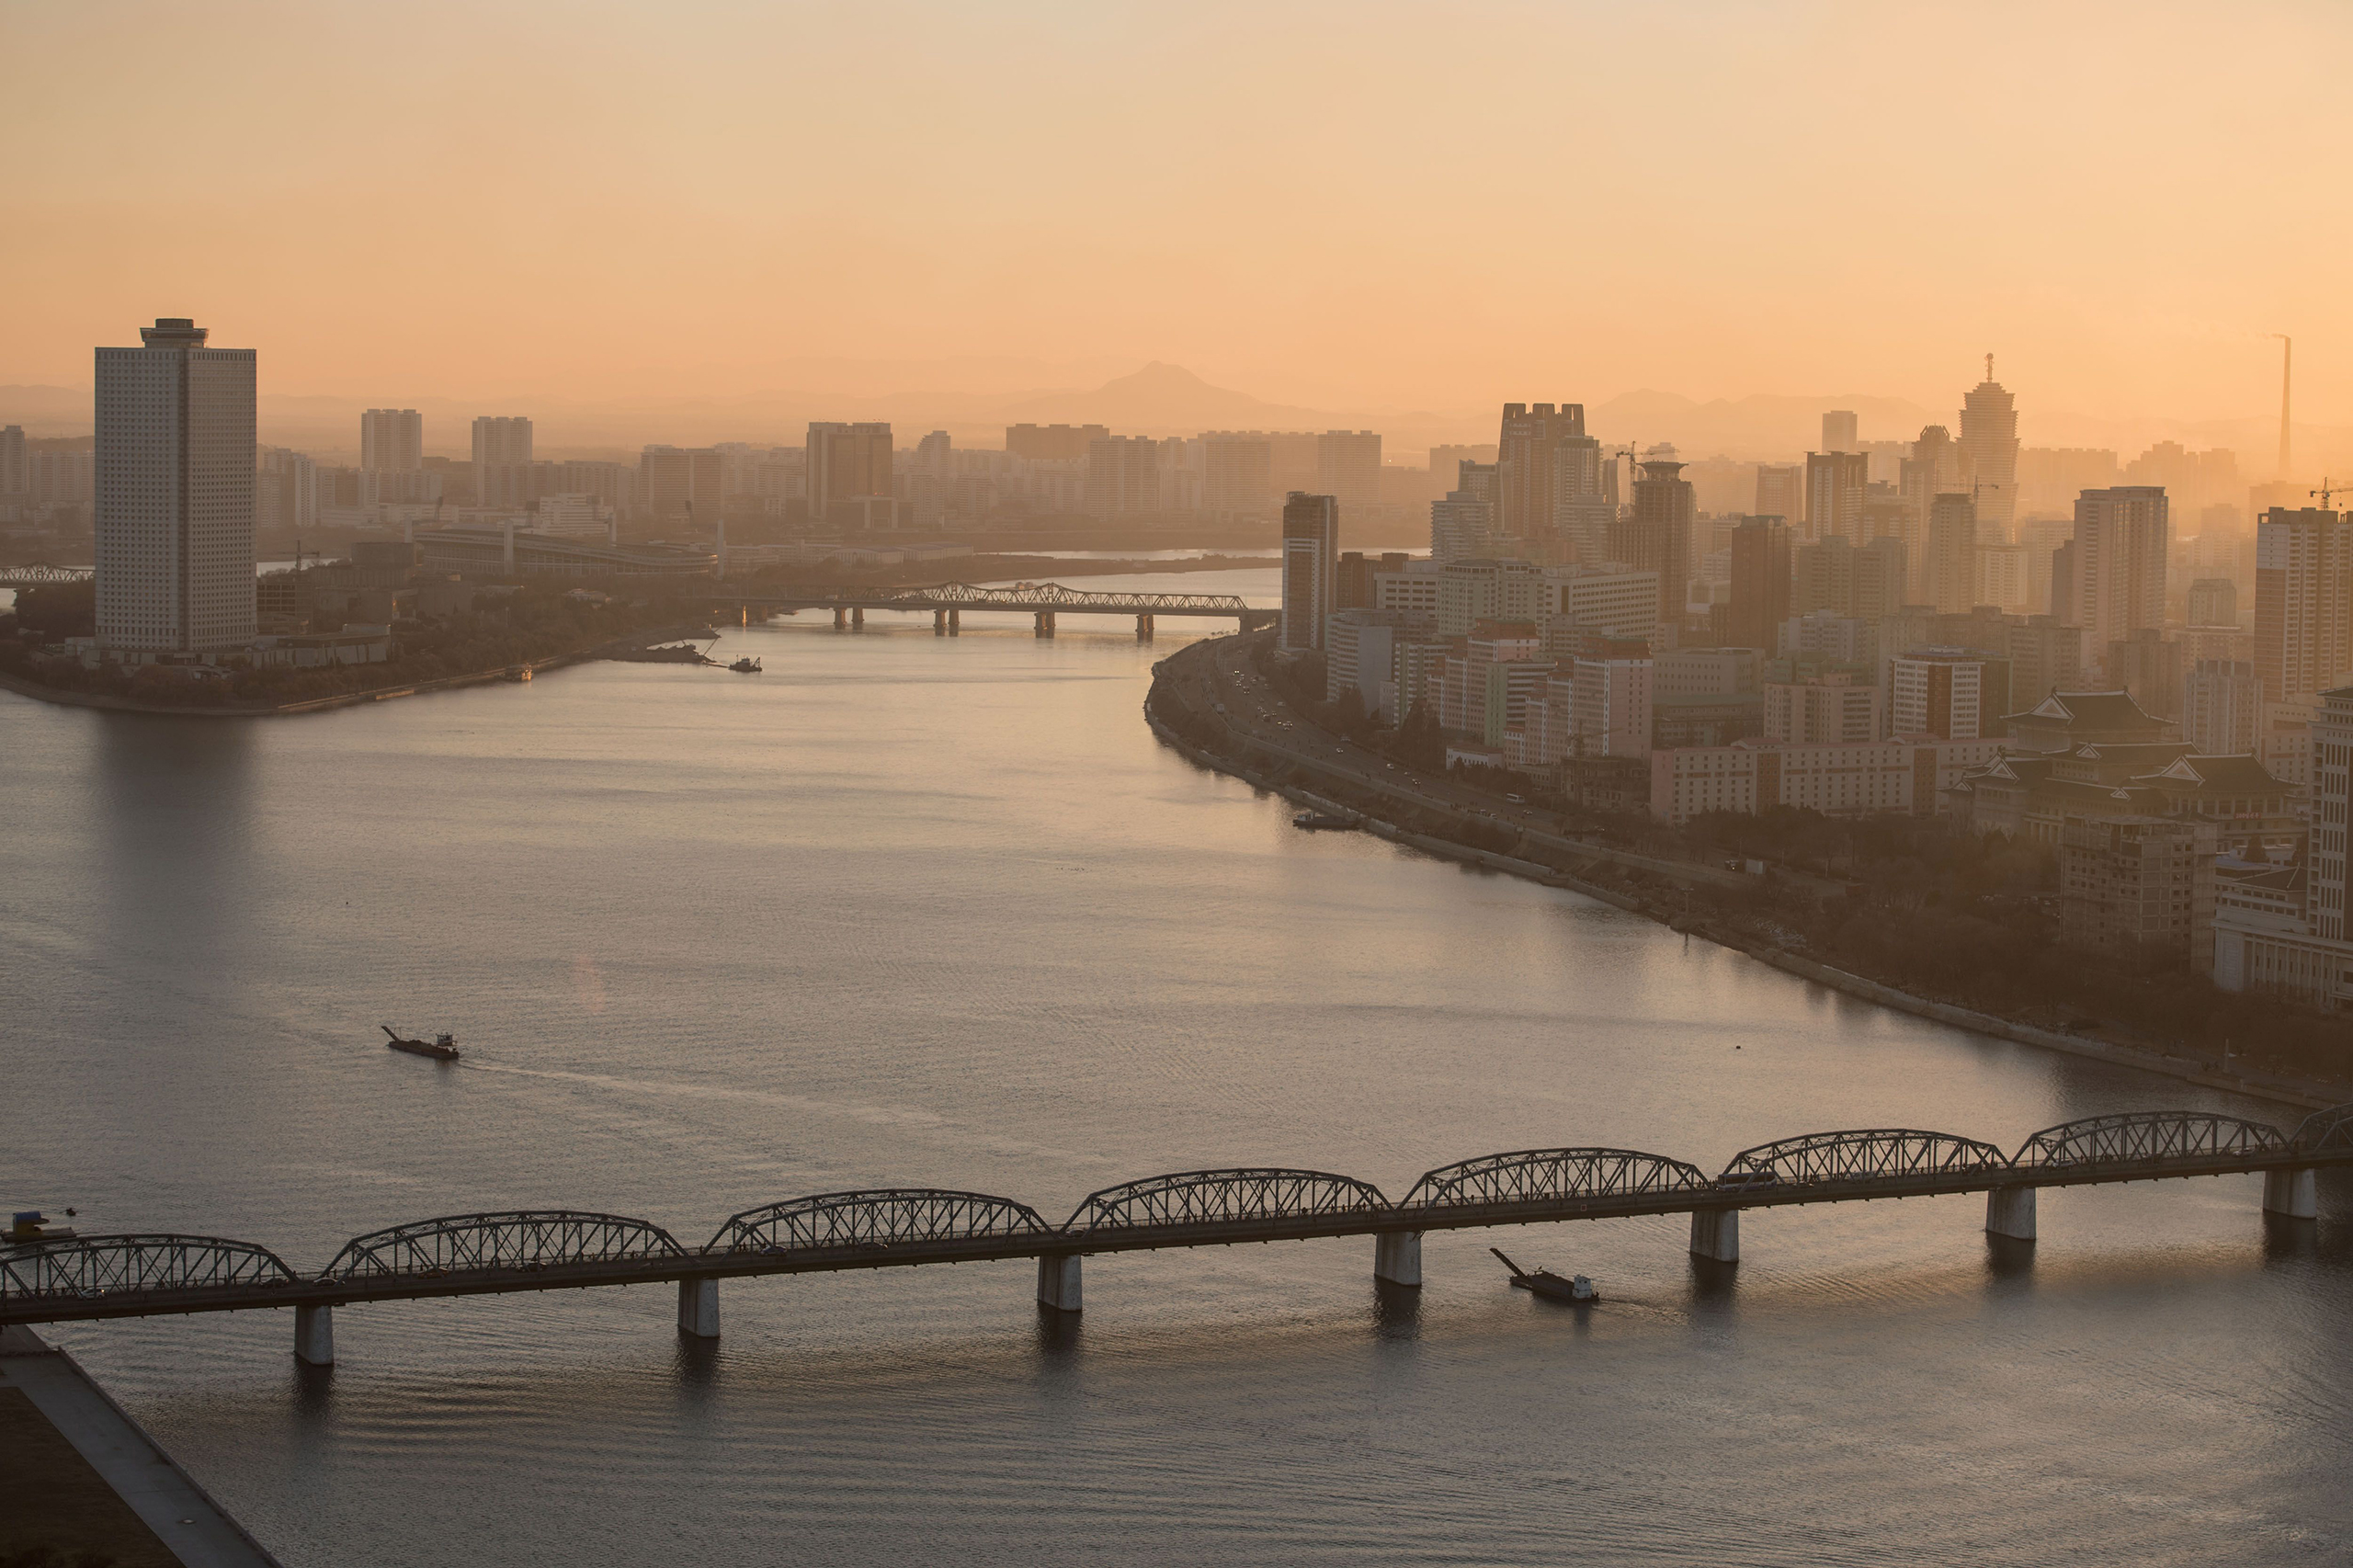 The Yanggakdo hotel, Taedong river and the Pyongyang city skyline on Nov. 28, 2016. (Ed Jones—AFP/Getty Images)